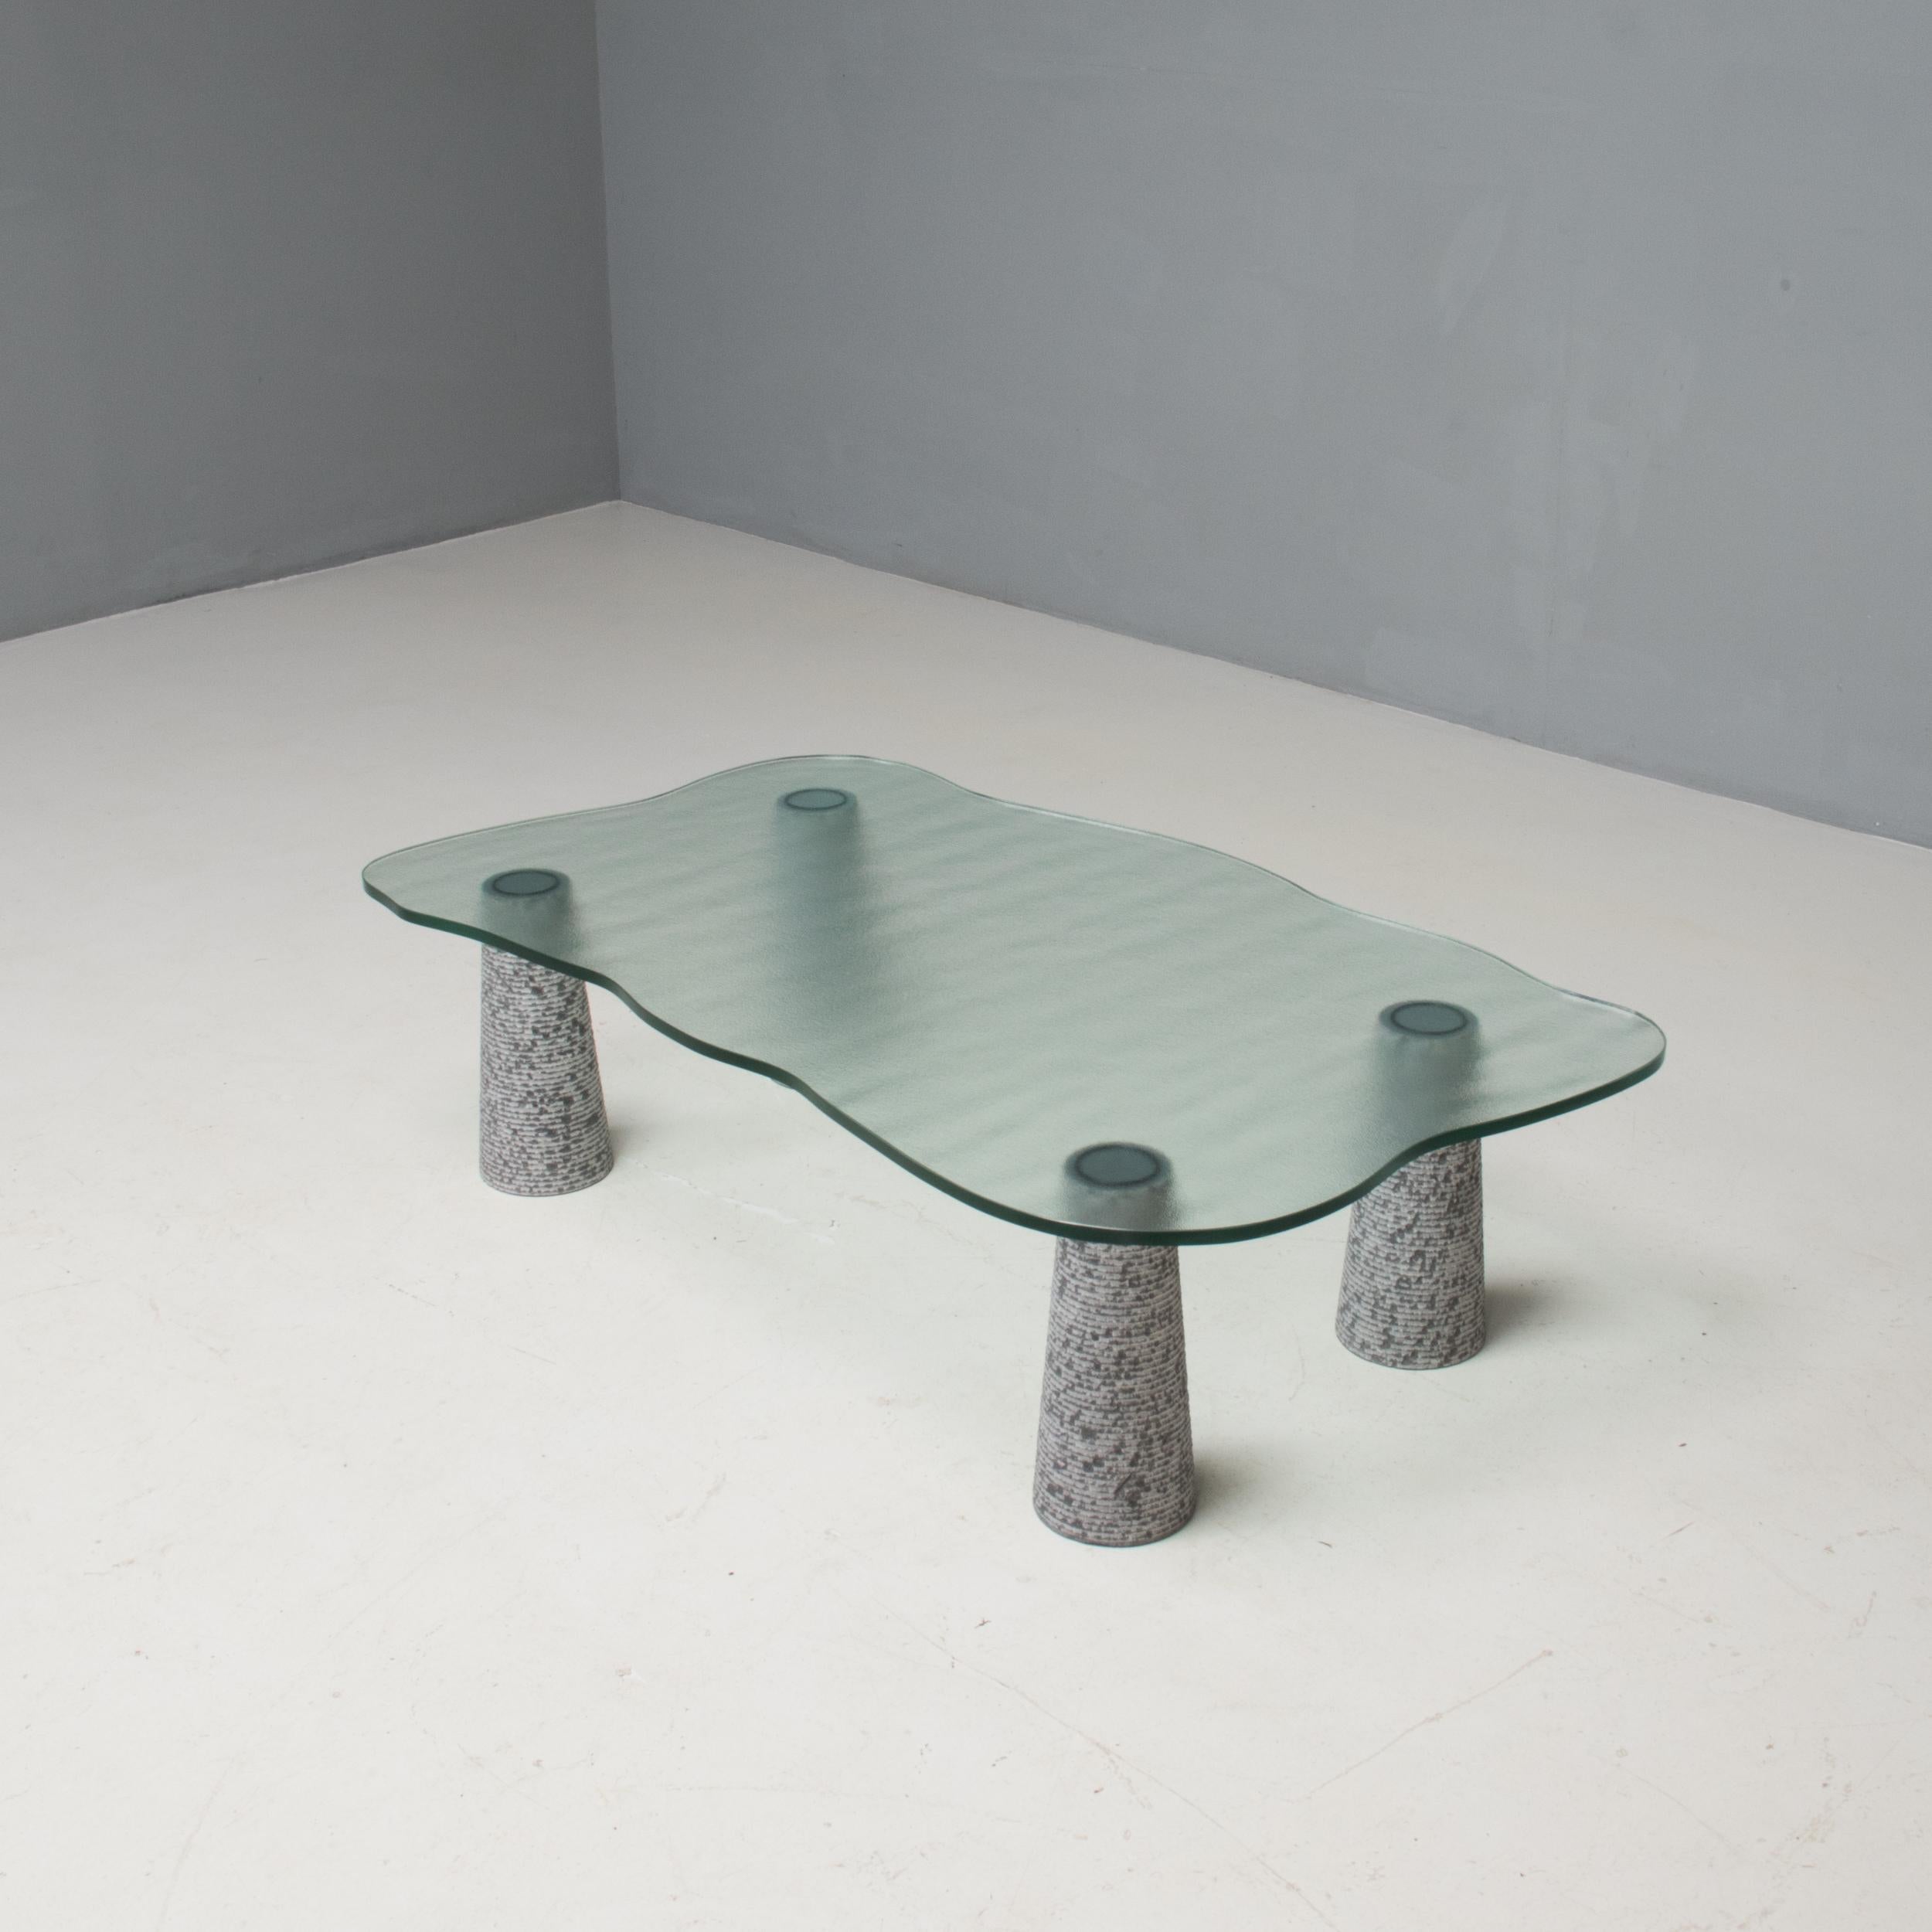 Brutalist Italian Casigliani Grey Marble & Textured Glass Coffee Table, 1980s For Sale 1